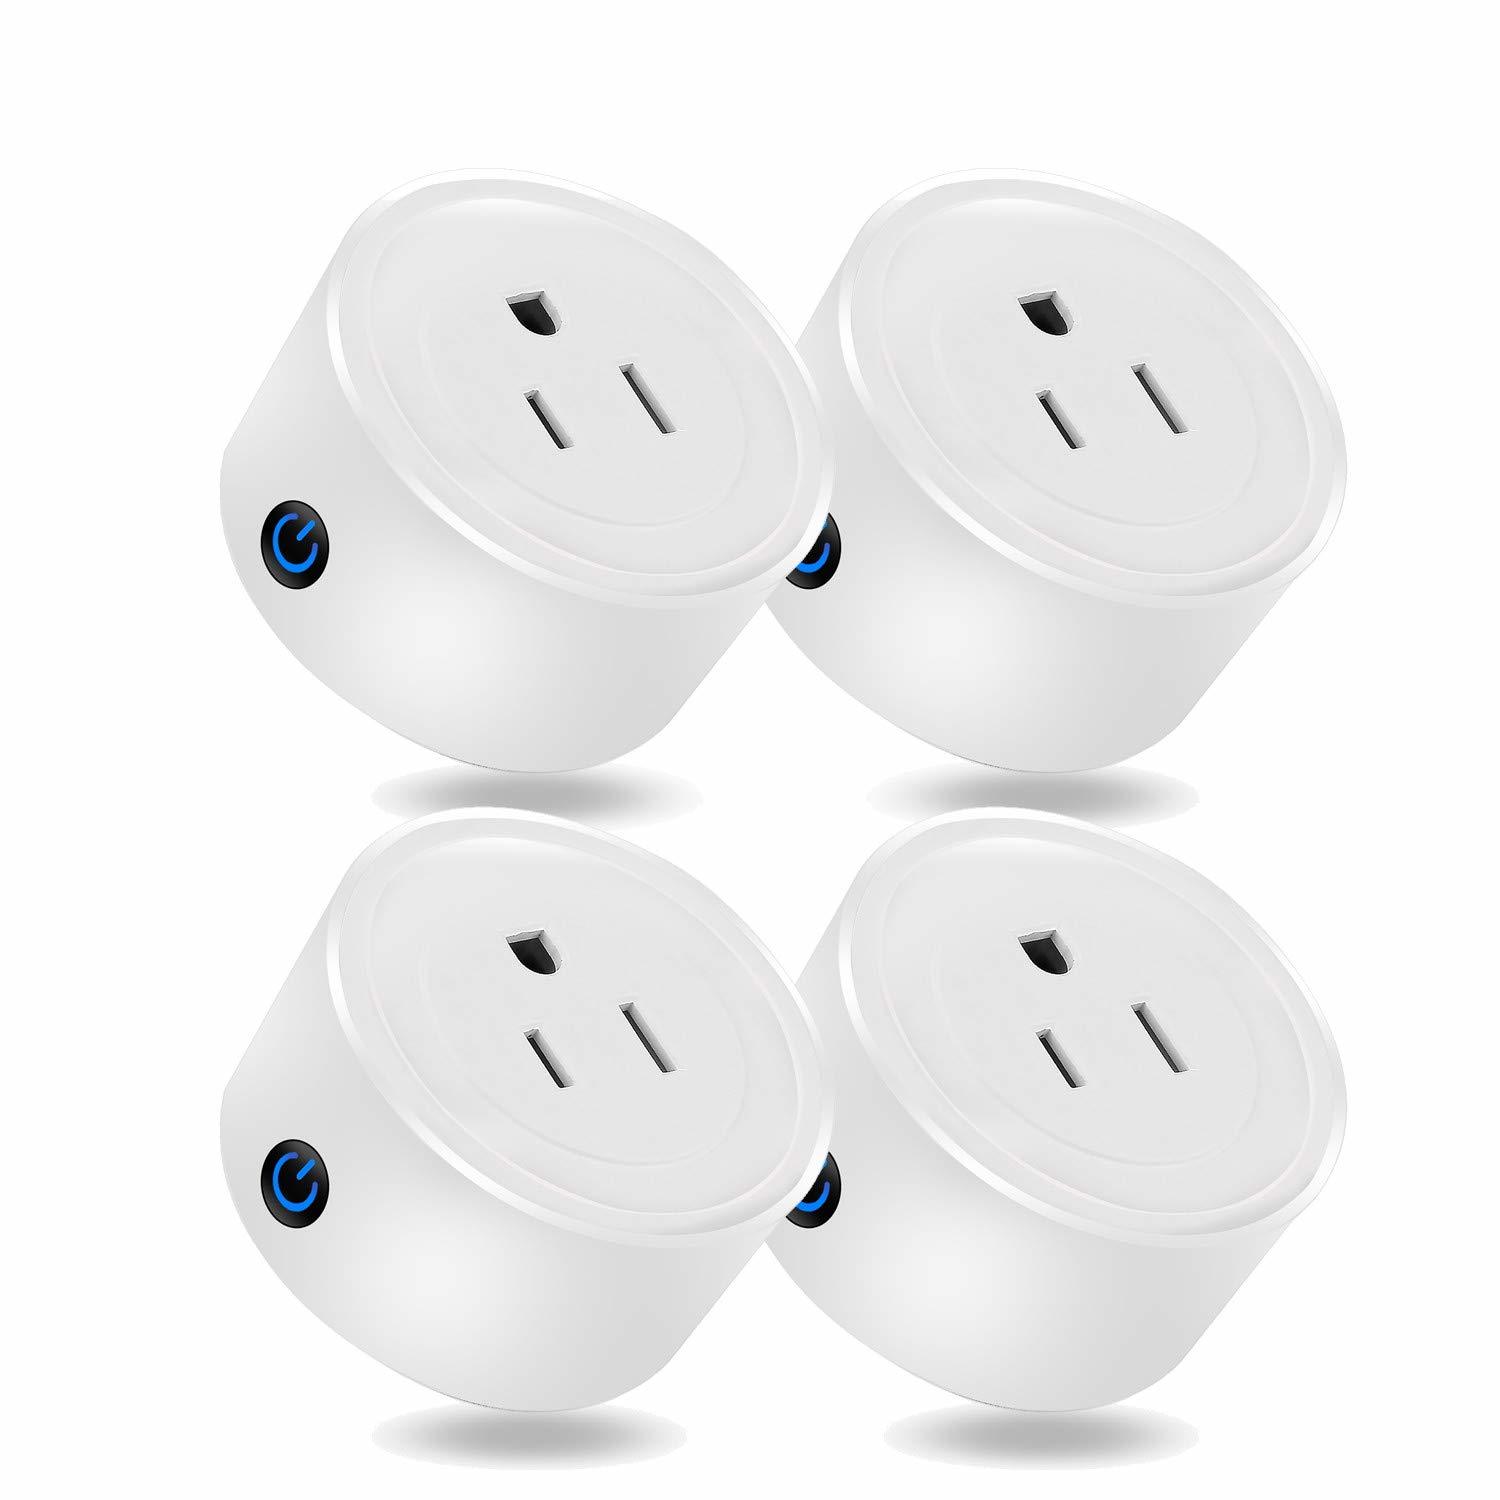 WiOn 50053 Outdoor WiFi Smart Plug-In Yard Stake, 3 Grounded Outlets -  Extension Cords & Surge Protectors